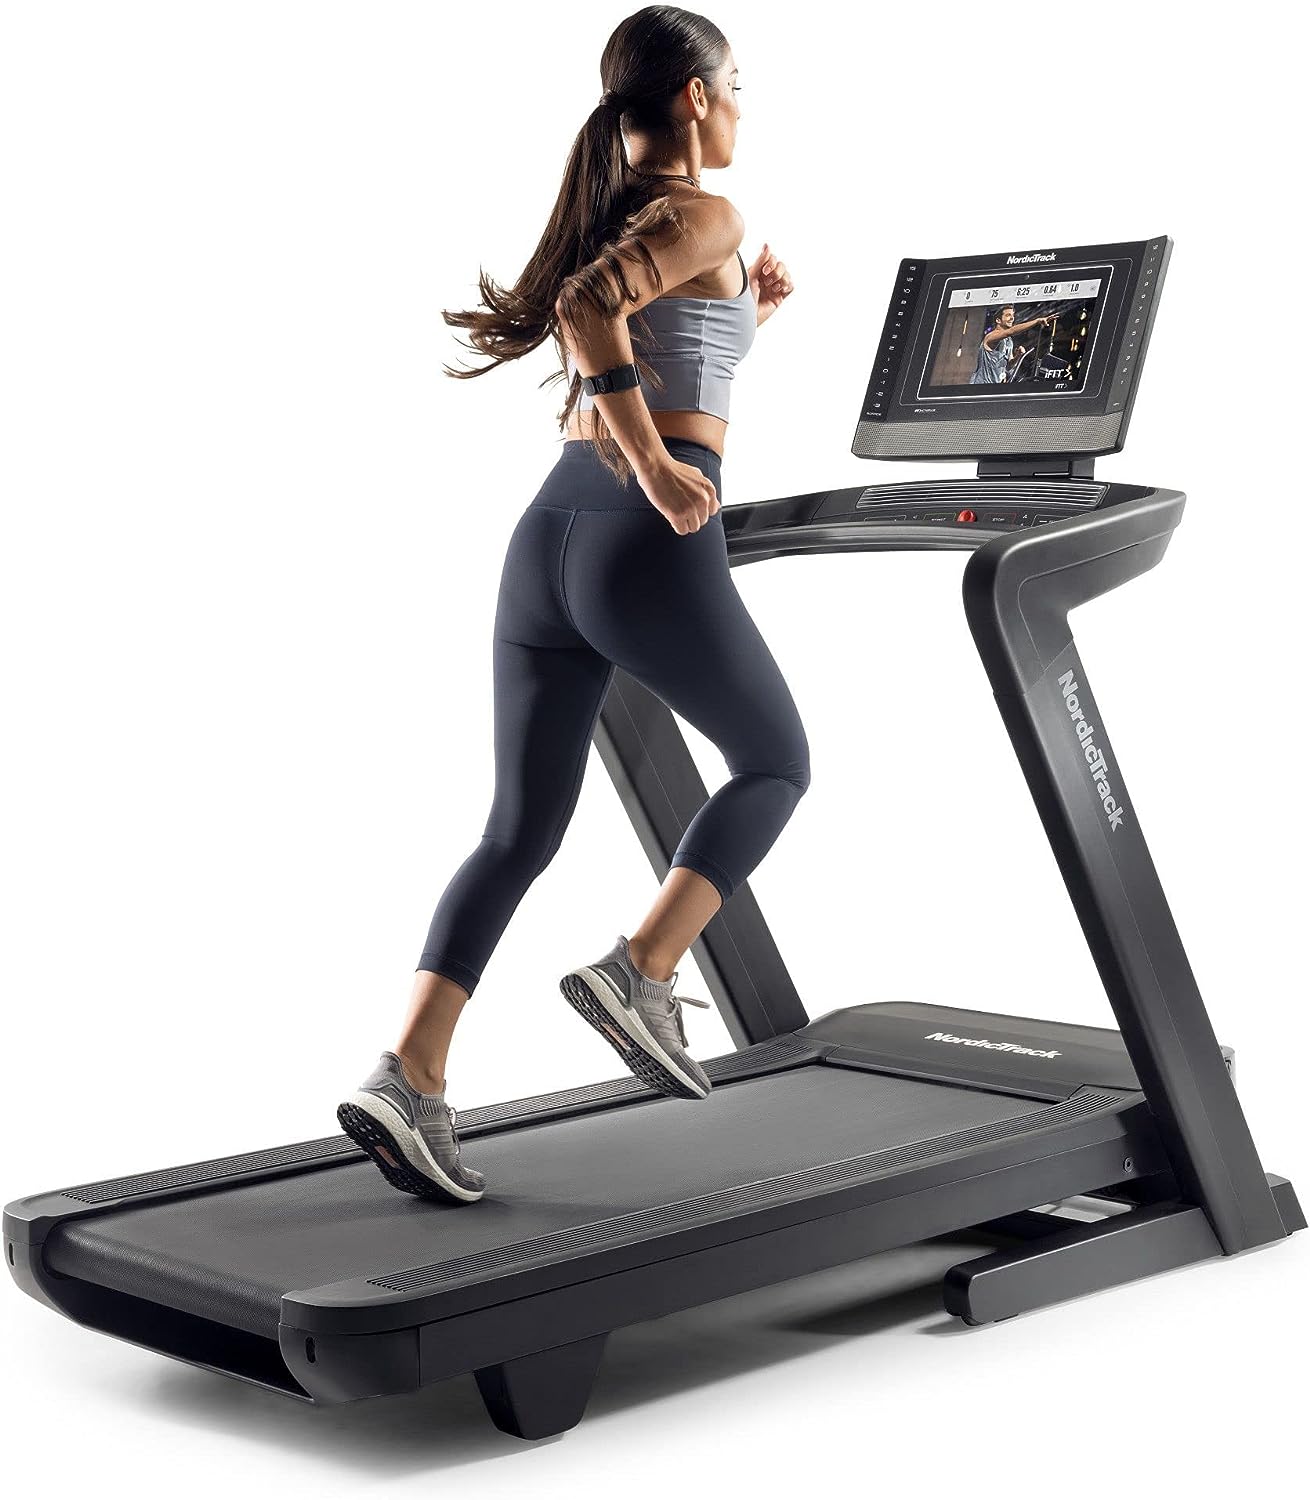 NordicTrack Commercial Series 1250, 1750, 2450: Expertly Engineered Foldable Treadmill, Treadmills for Home Use, Walking Treadmill with Incline, Superior Interactive Training Experience